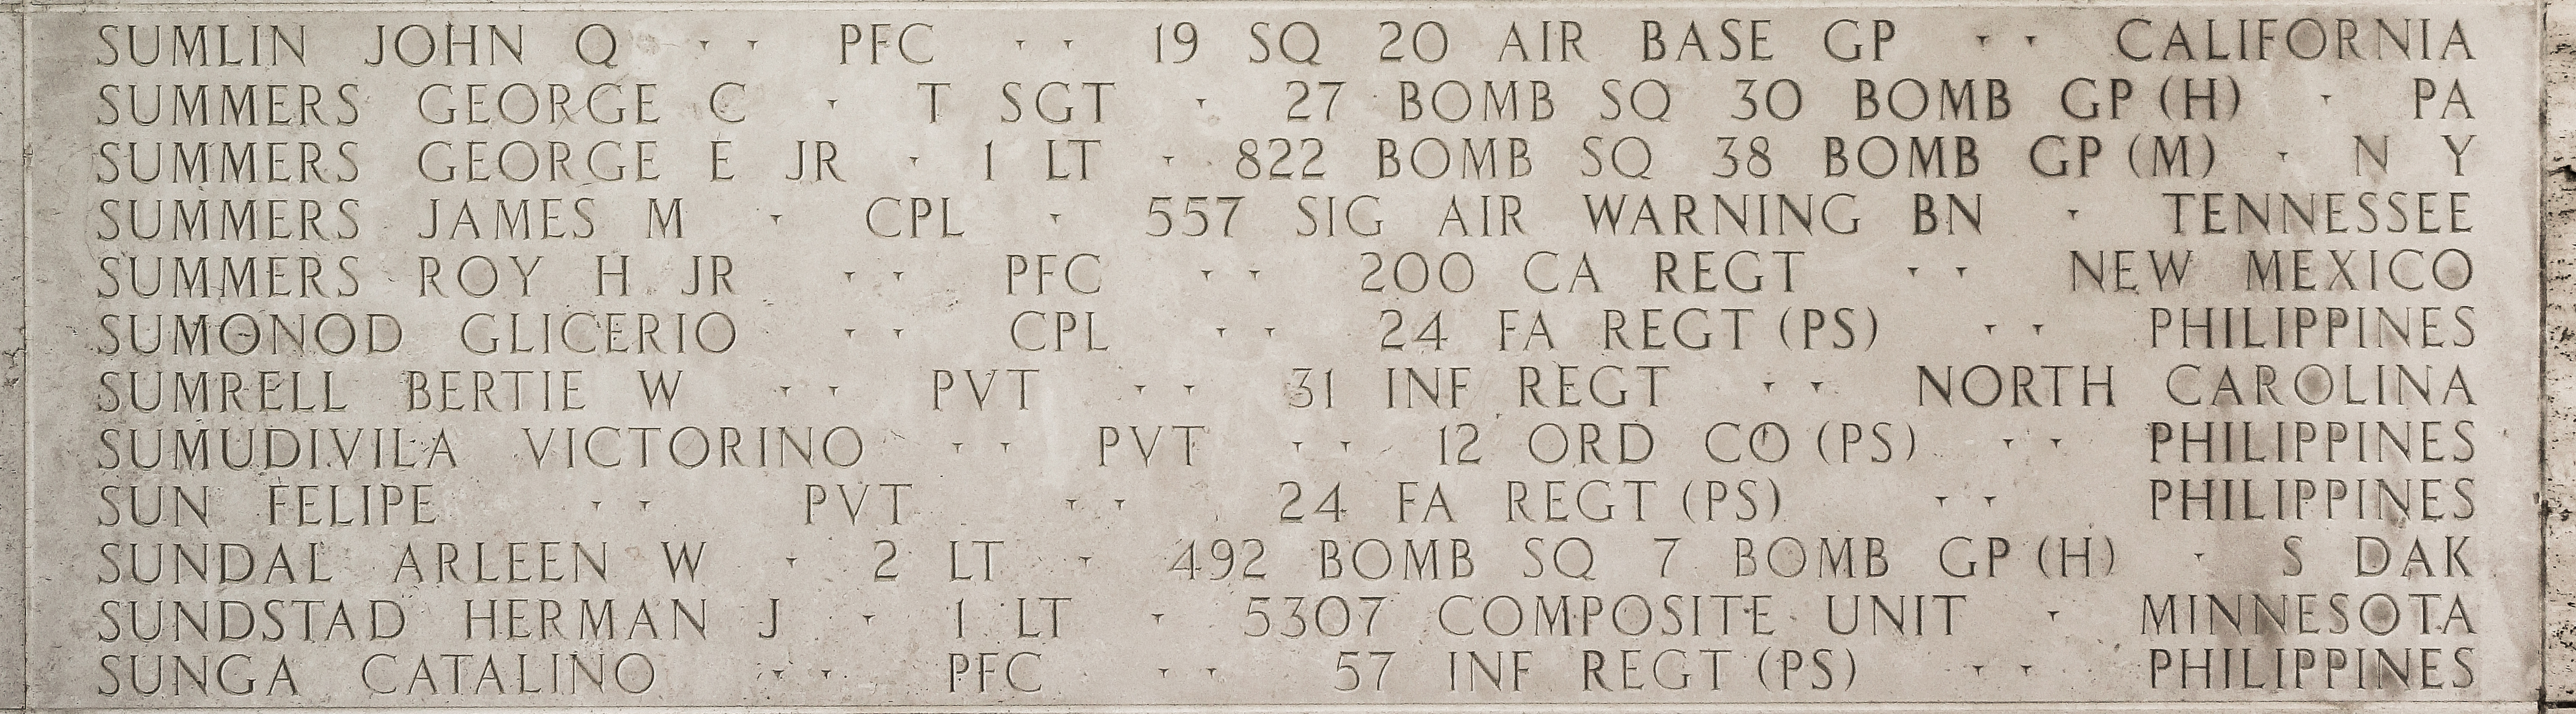 Roy H. Summers, Private First Class